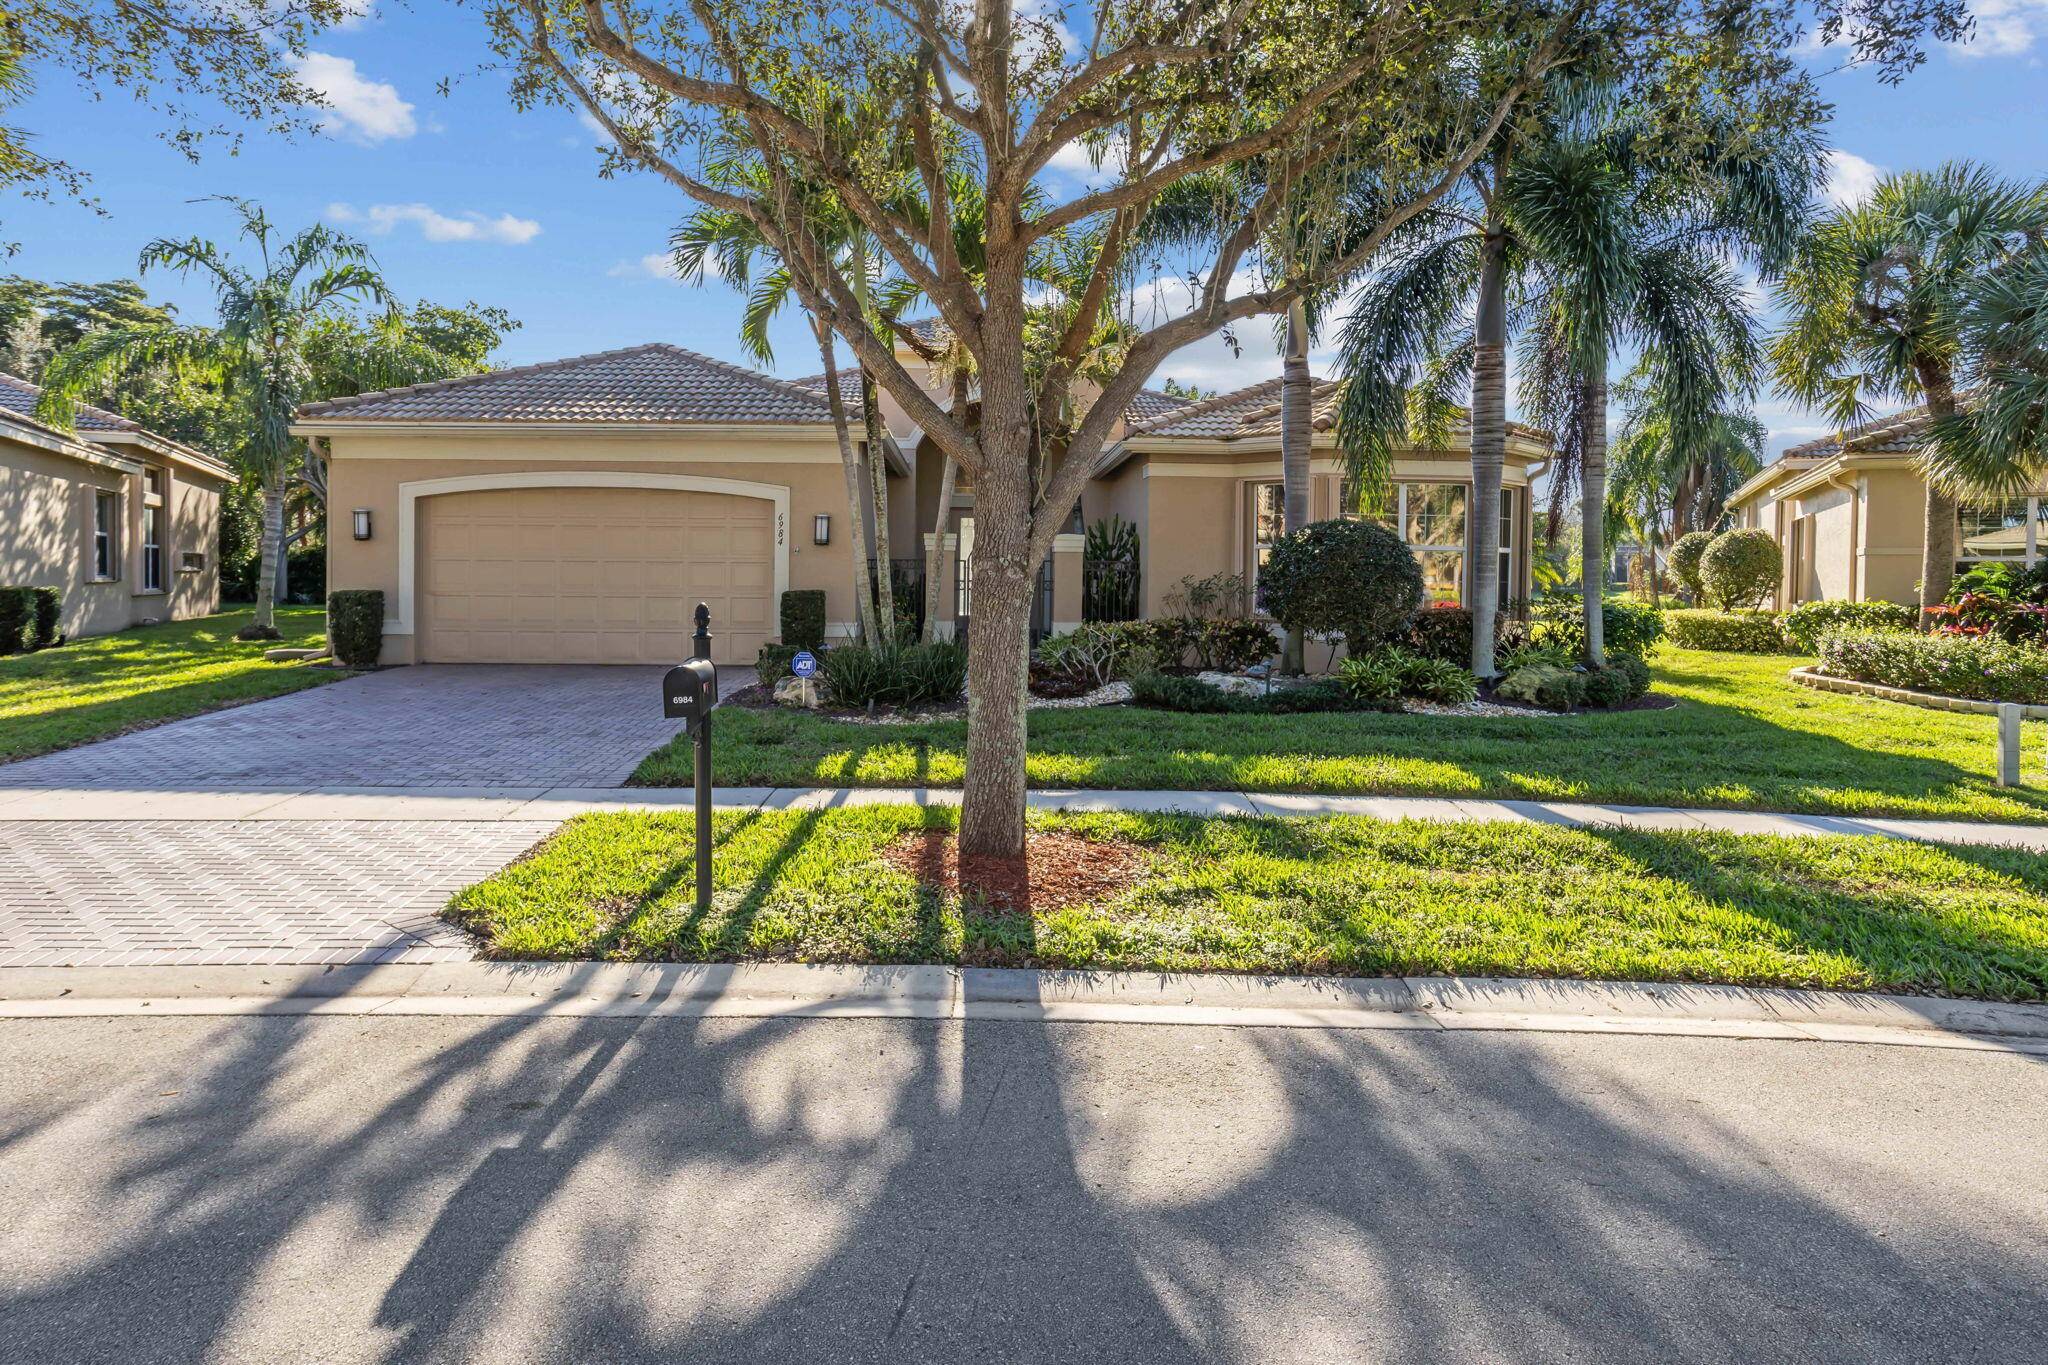 Discover the charm of this exquisite home, a true gem in the heart of Boynton Beach's Valencia Pointe community.